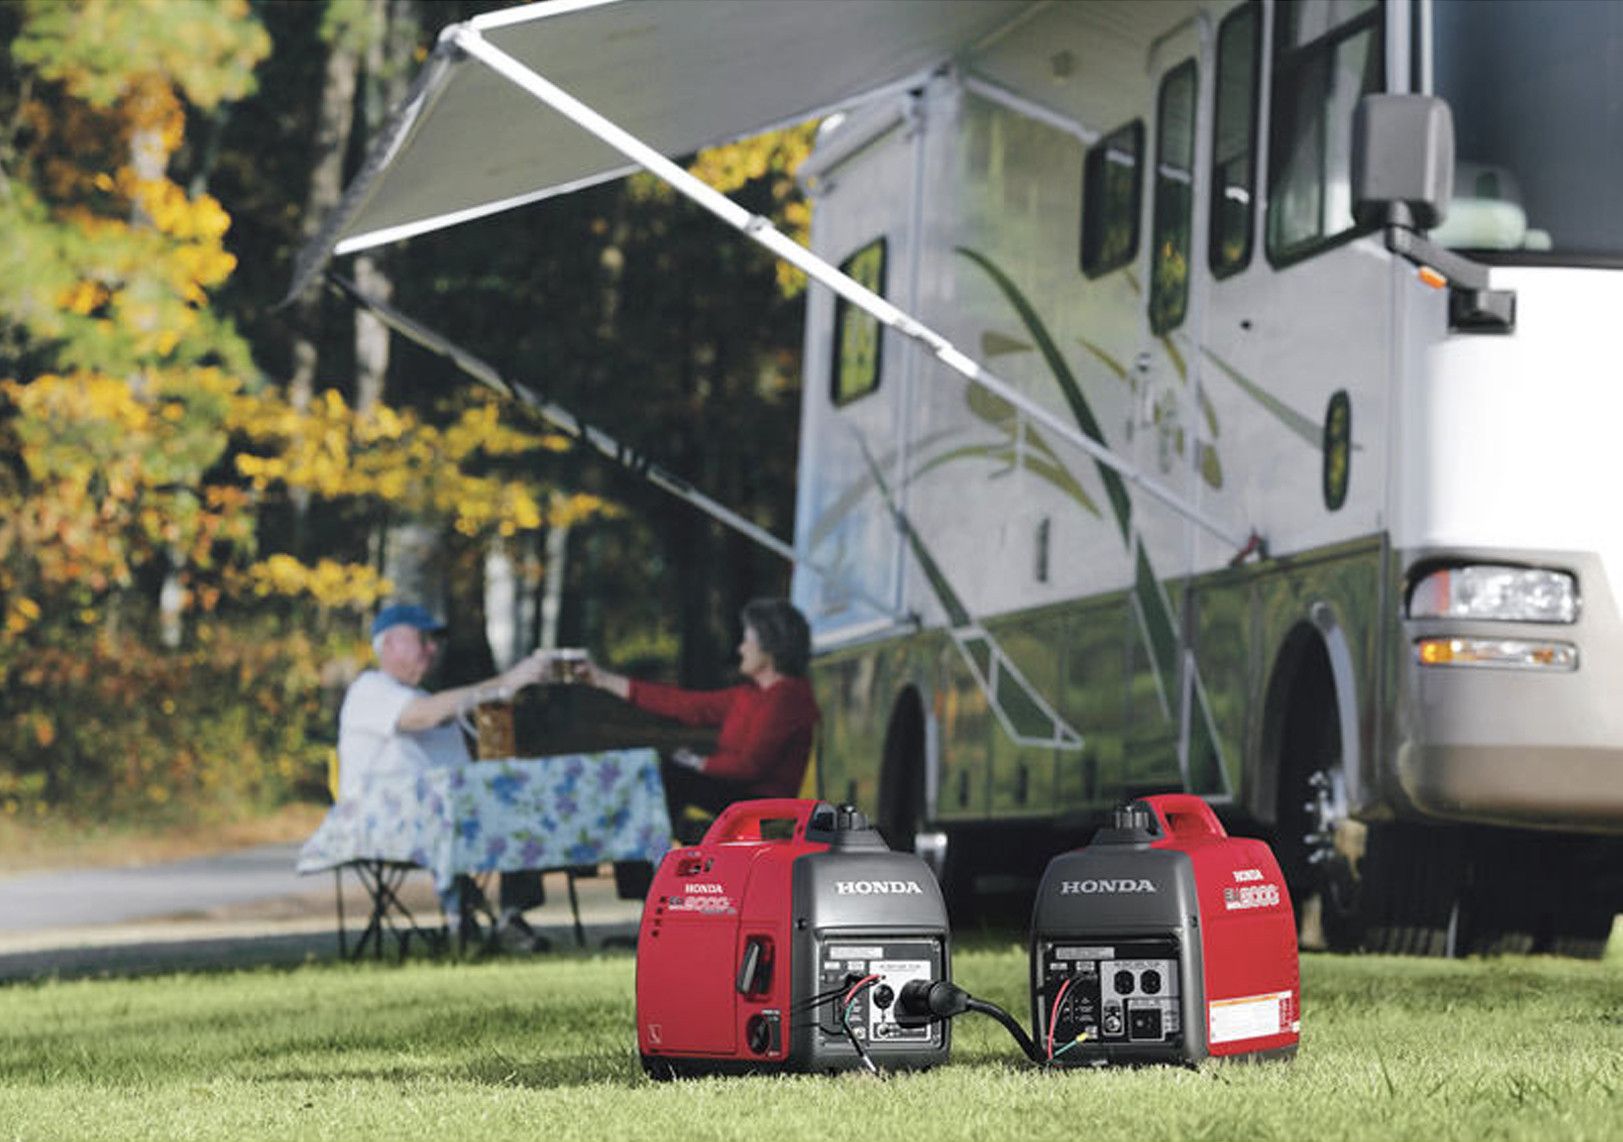 What To Look For When Choosing An Rv Generator